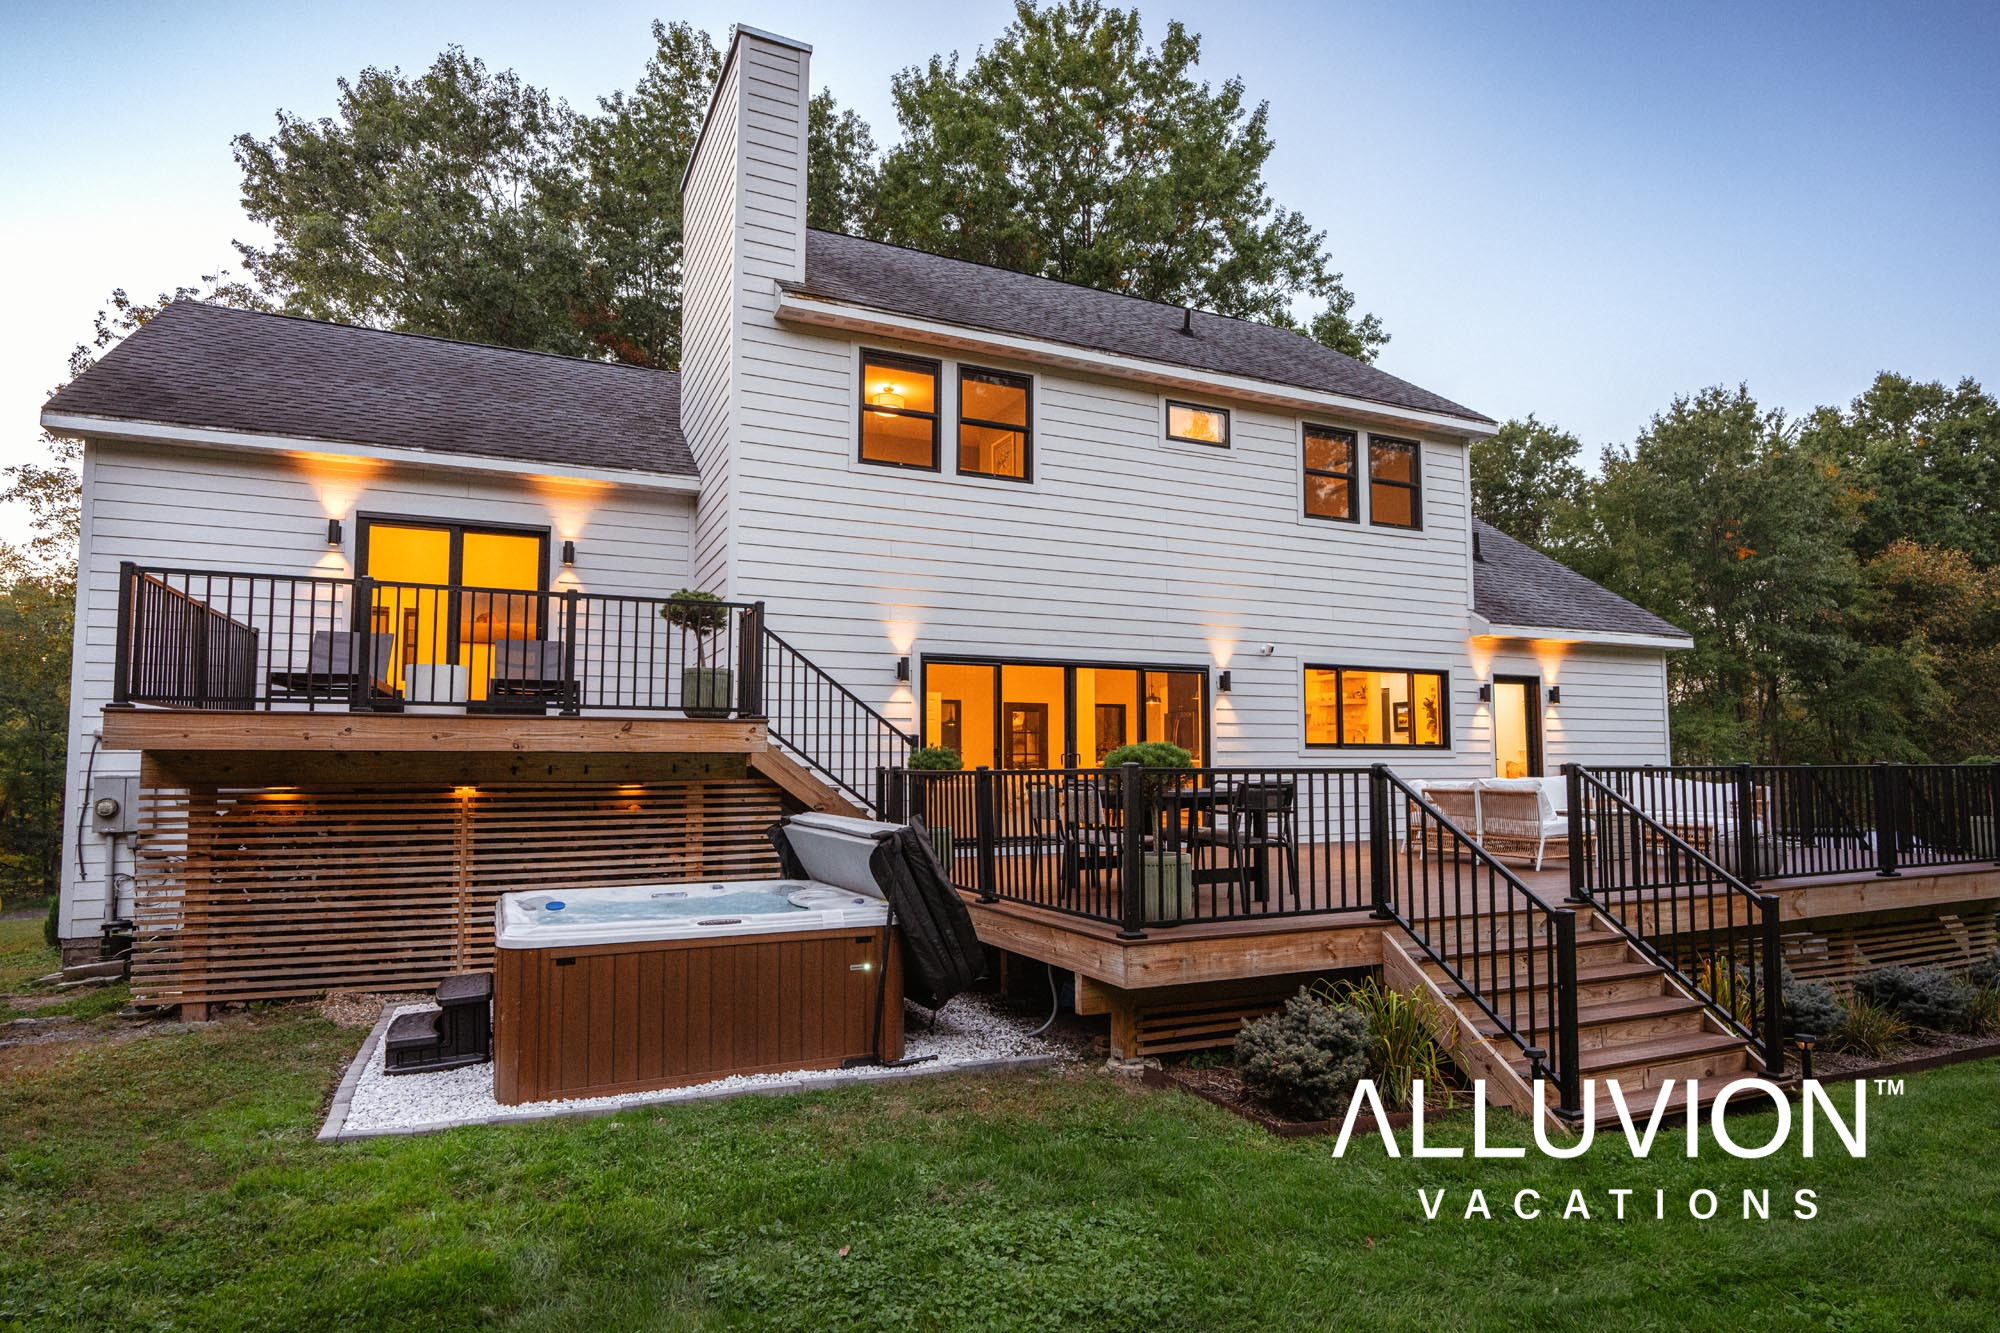 Dive into the heart of nature with exclusive Airbnbs in the Hudson Valley, handpicked by Alluvion Vacations for your spring season escape.